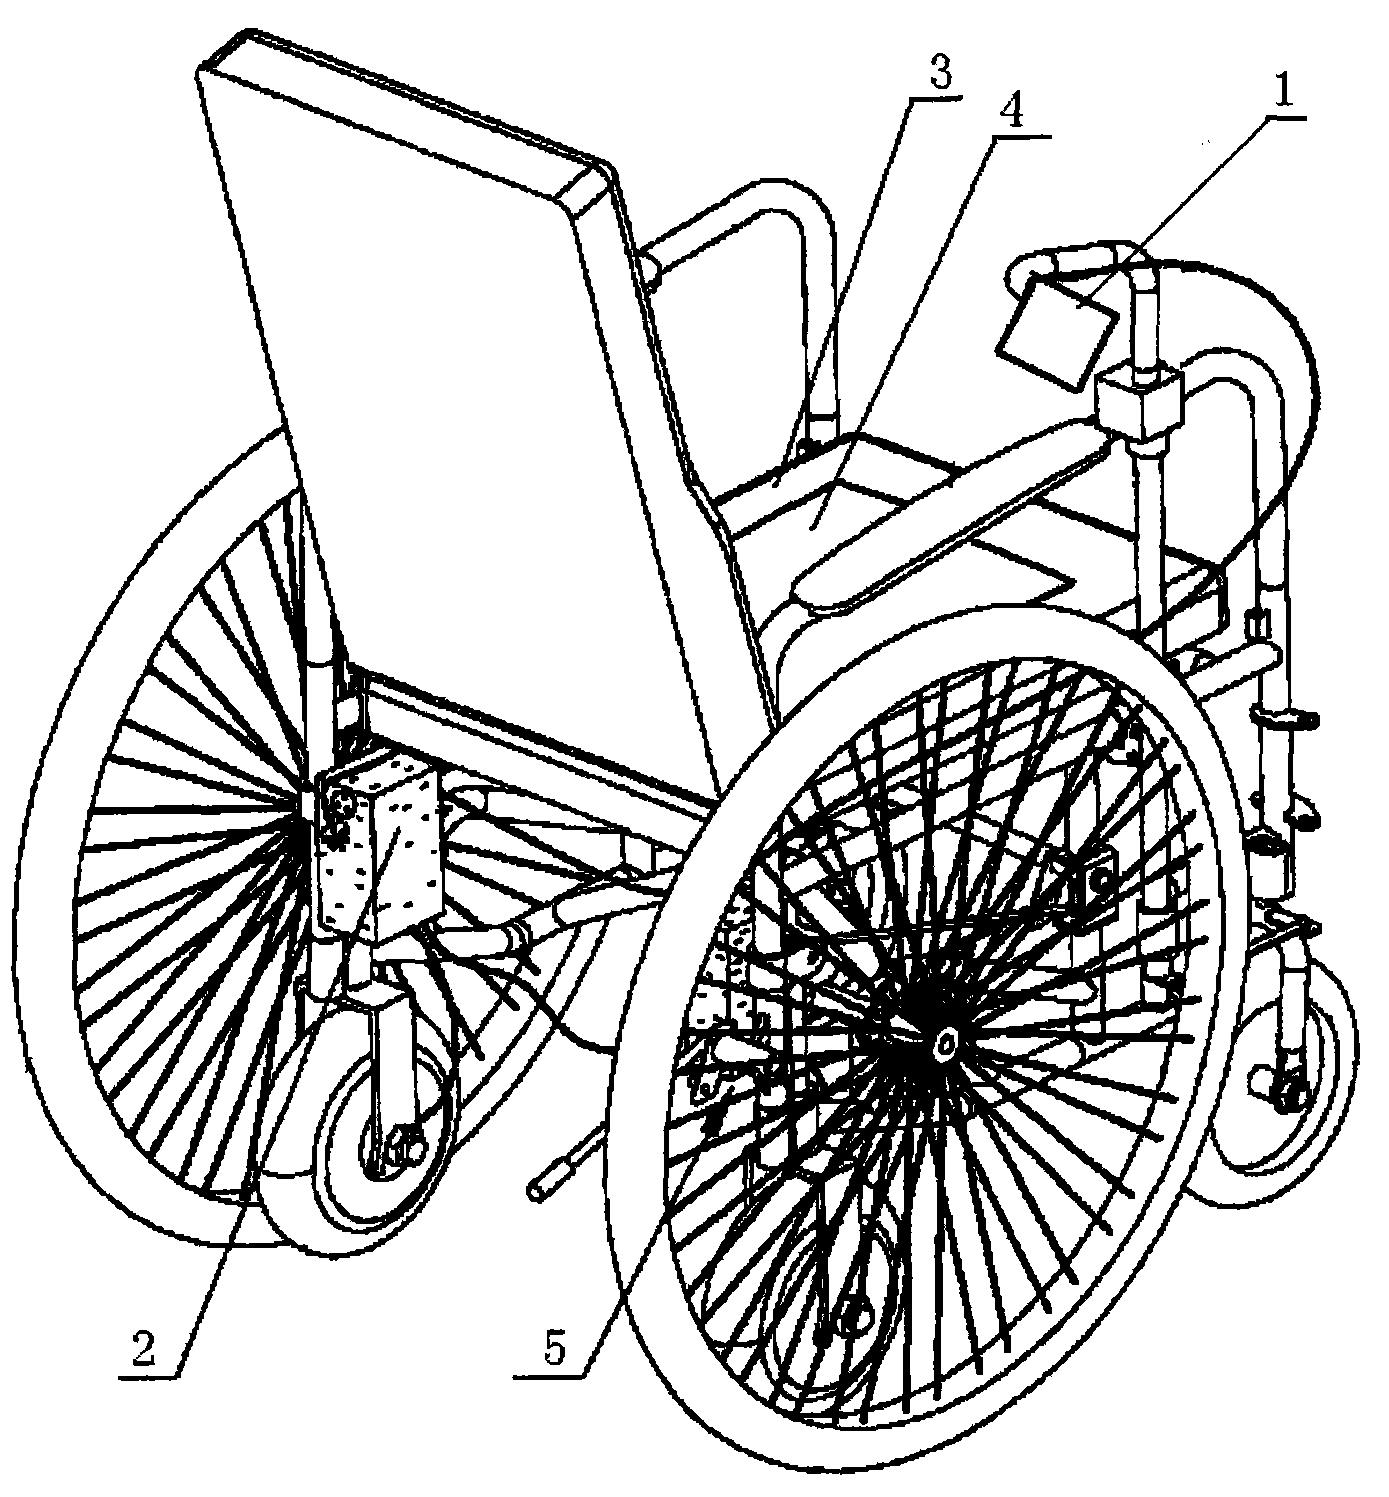 Wheel chair for severe disabled